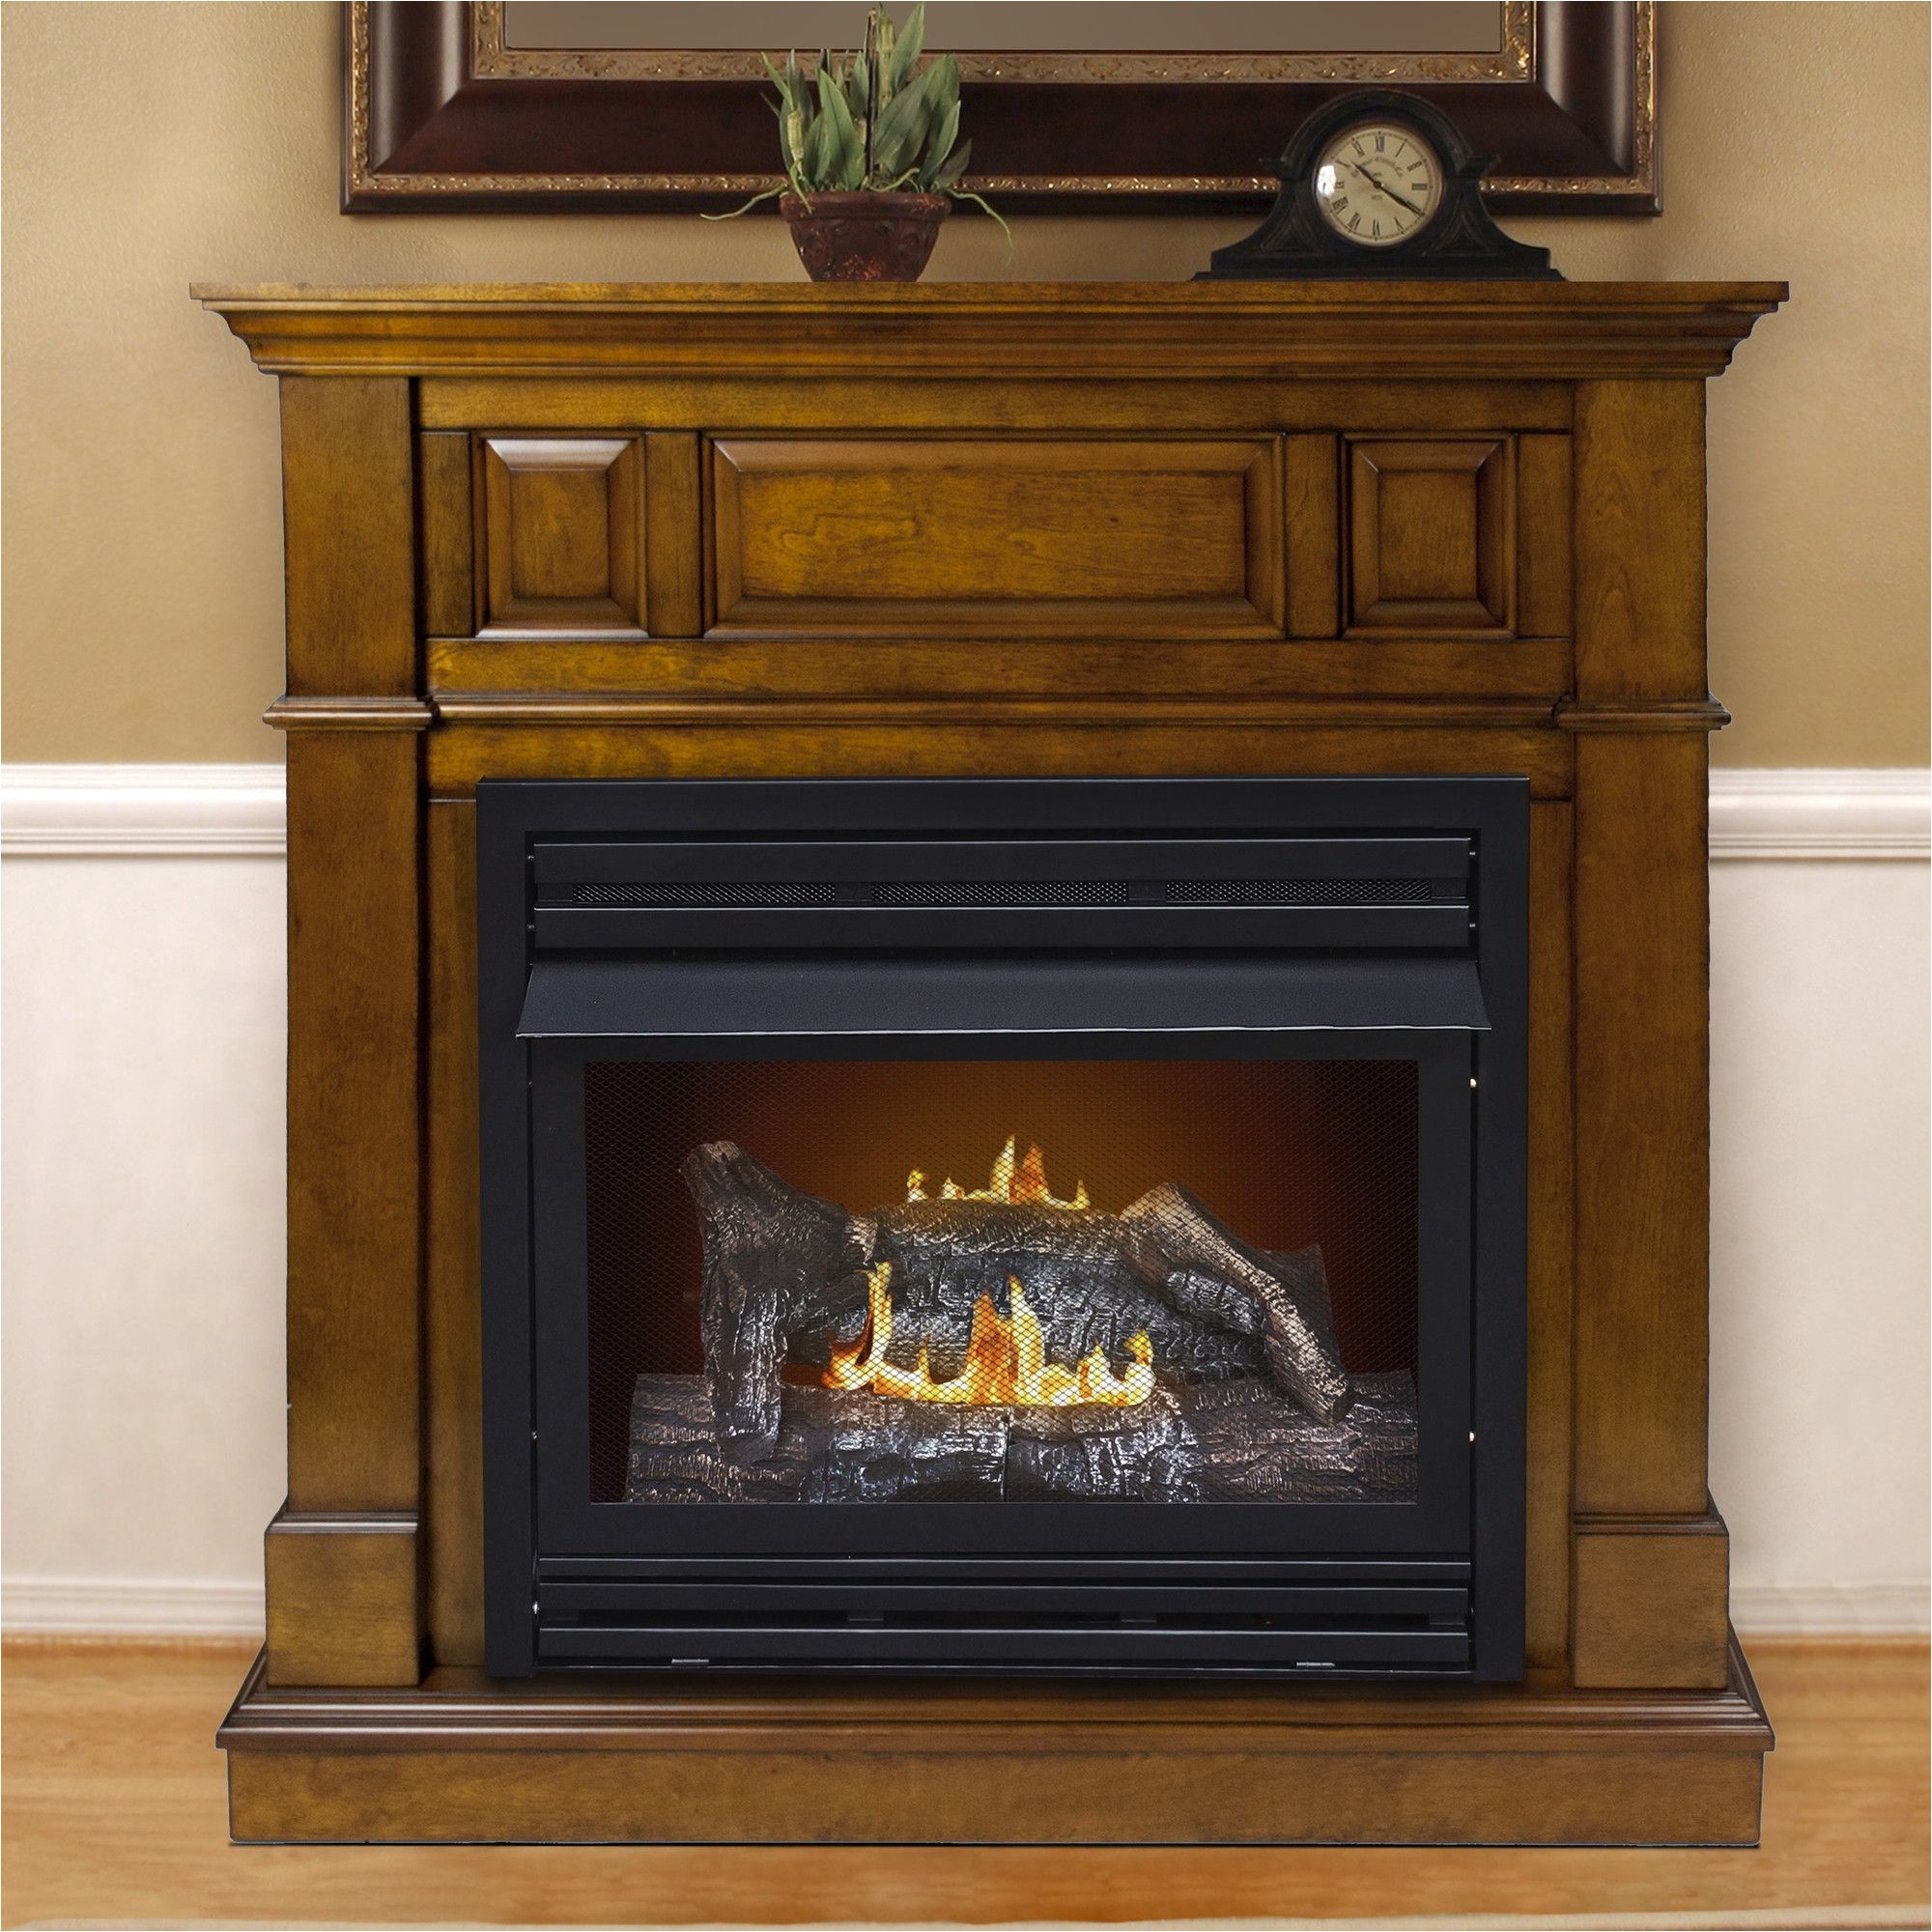 Ventless Gas Fireplace with Mantle Dual Fuel Vent Free Wall Mount Gas Fireplace Products Pinterest